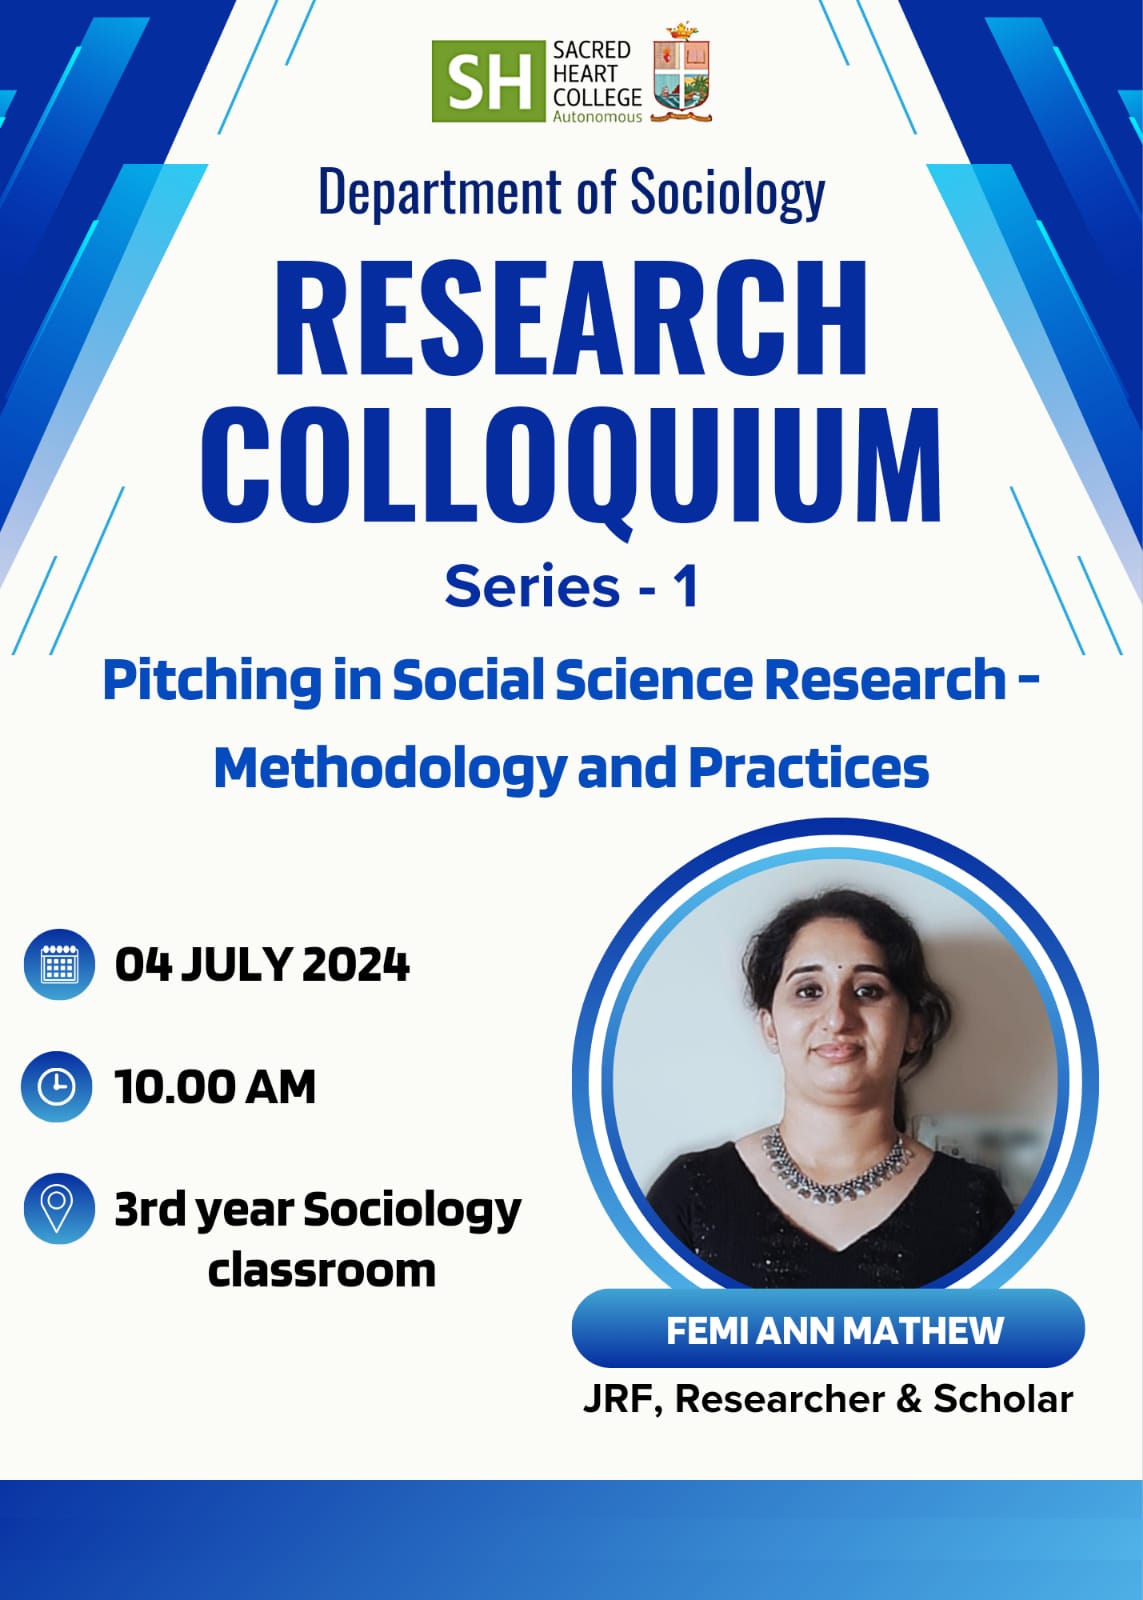 Research Colloquium Series – 1 by Department of Sociology